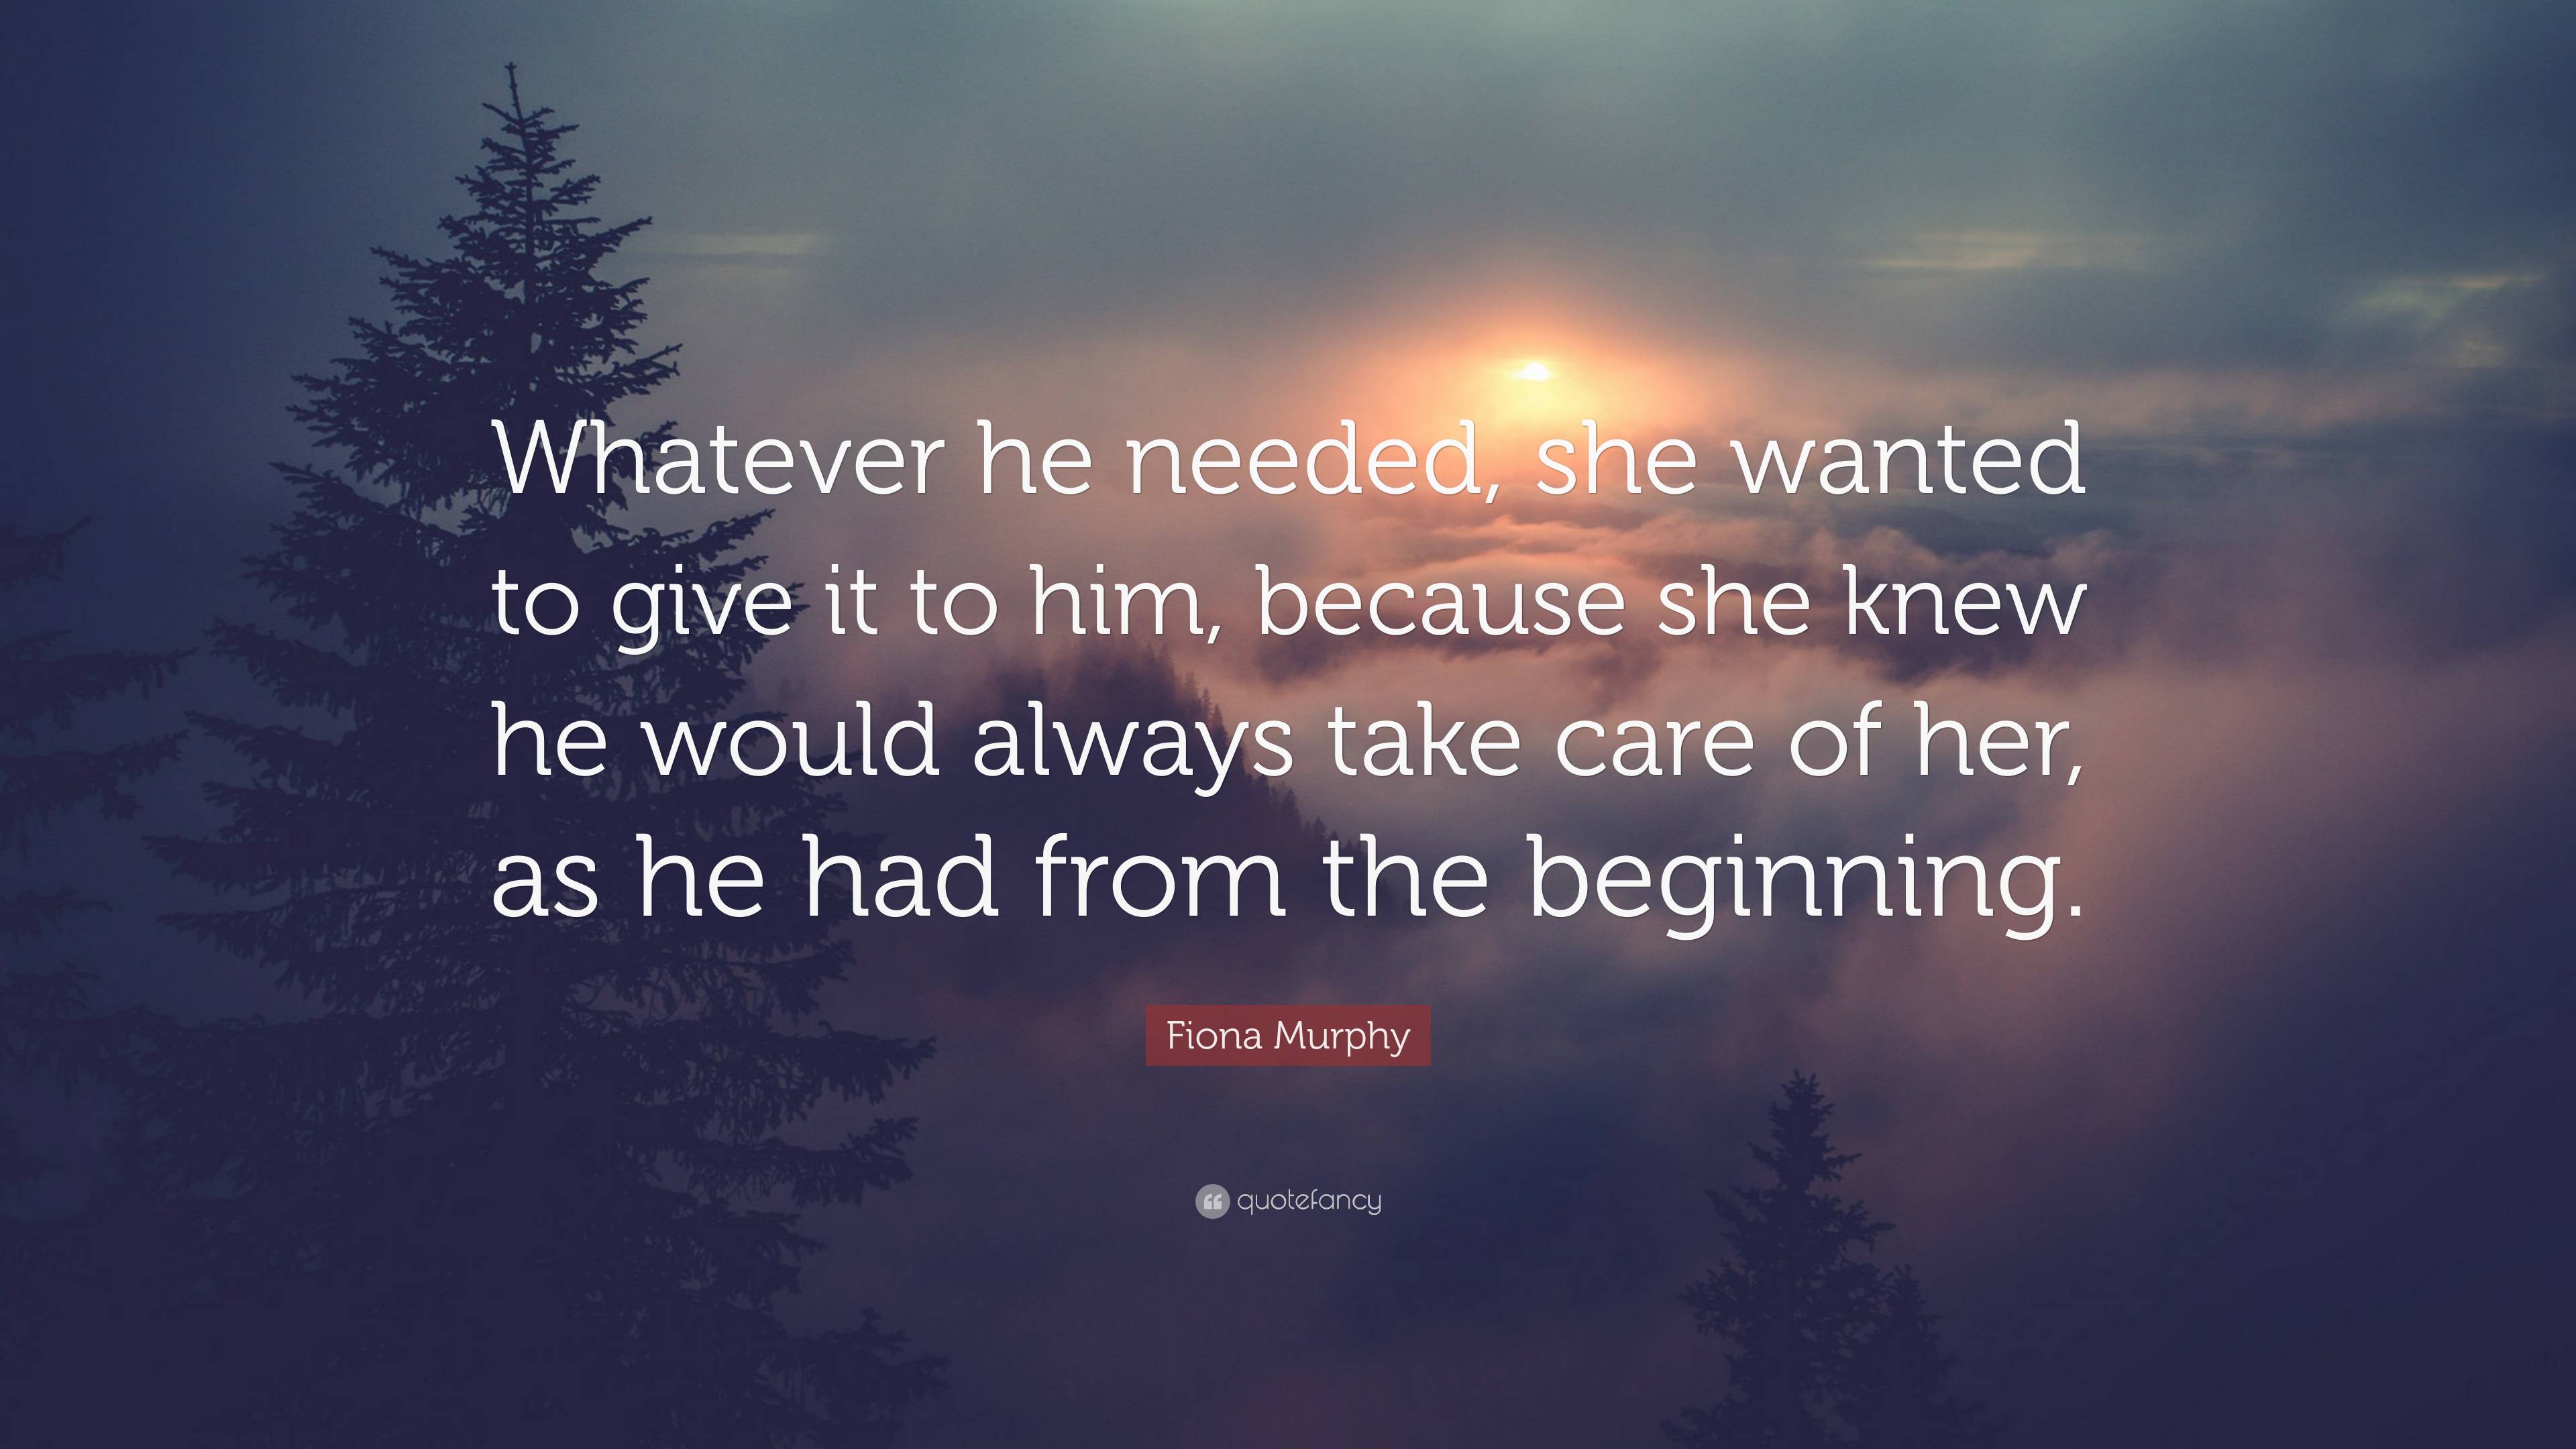 Fiona Murphy Quote: “Whatever he needed, she wanted to give it to him ...